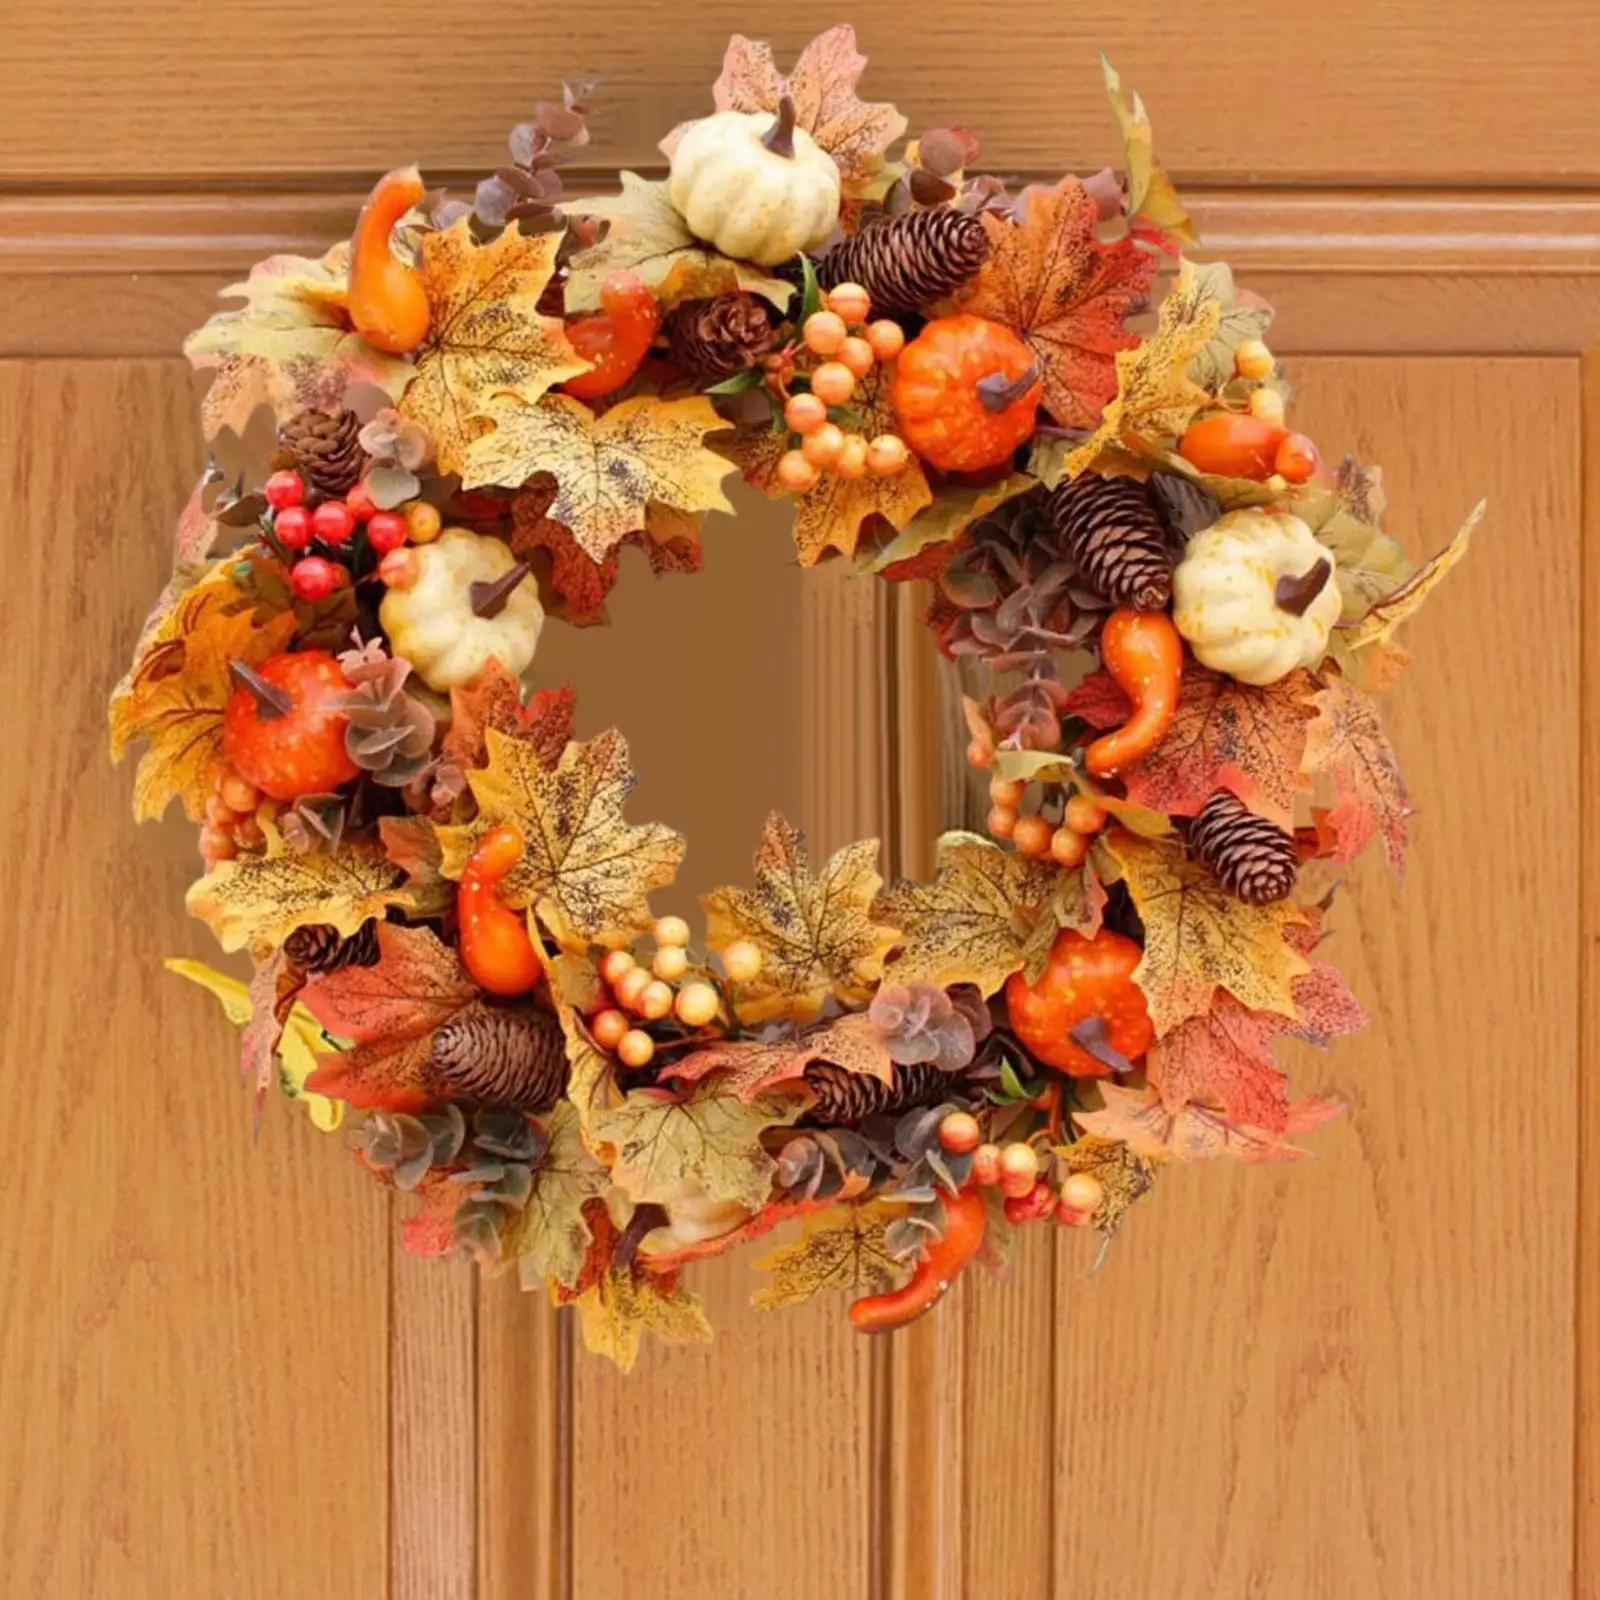 Artificial Fall Pumpkin Wreath Decor Harvest Hanging for Home Wall Indoor